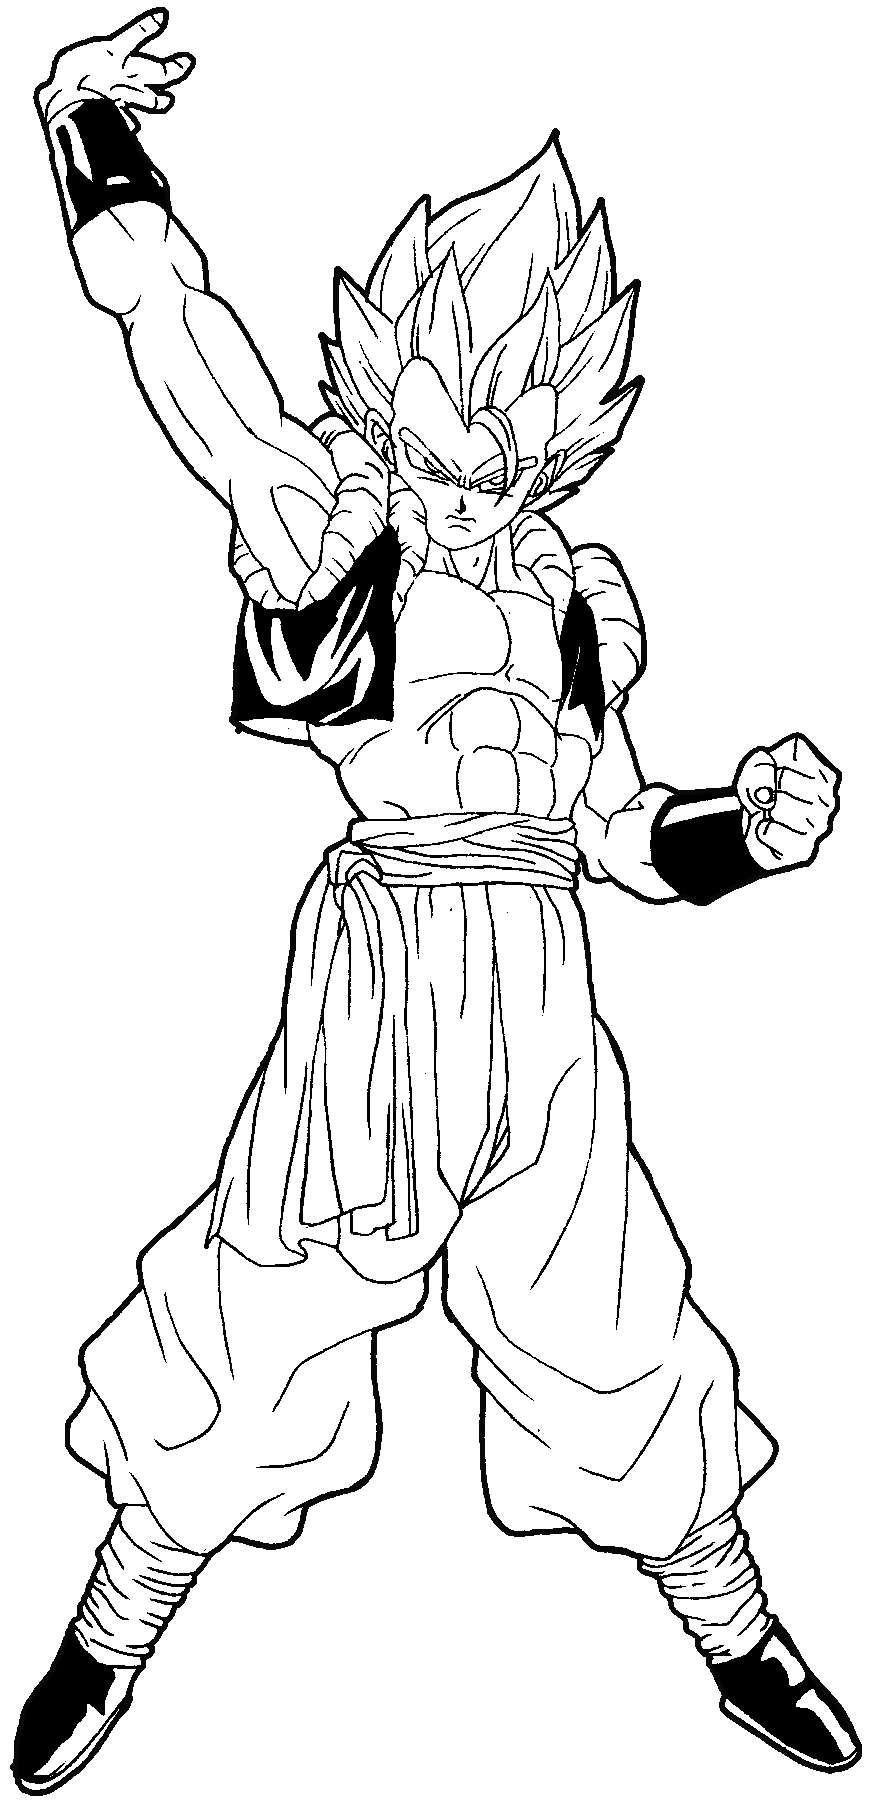 gogeta_12 How to draw Goku in a few quick steps (Easy drawing tutorials)